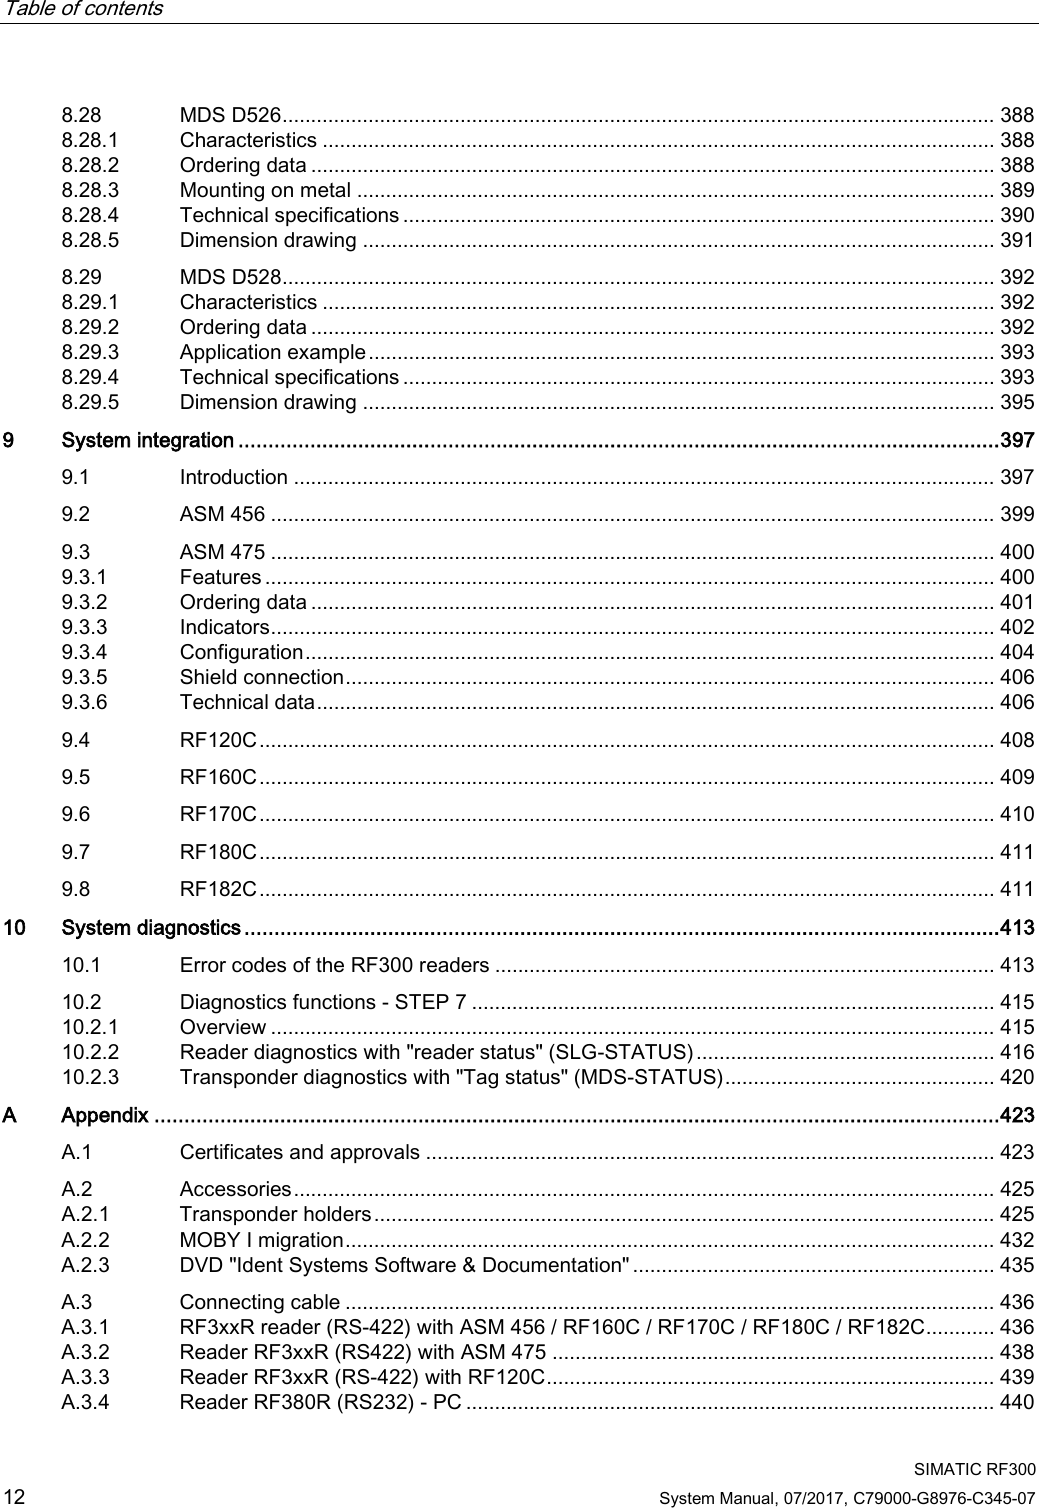 Table of contents     SIMATIC RF300 12 System Manual, 07/2017, C79000-G8976-C345-07 8.28 MDS D526 ............................................................................................................................ 388 8.28.1 Characteristics ..................................................................................................................... 388 8.28.2 Ordering data ....................................................................................................................... 388 8.28.3 Mounting on metal ............................................................................................................... 389 8.28.4 Technical specifications ....................................................................................................... 390 8.28.5 Dimension drawing .............................................................................................................. 391 8.29 MDS D528 ............................................................................................................................ 392 8.29.1 Characteristics ..................................................................................................................... 392 8.29.2 Ordering data ....................................................................................................................... 392 8.29.3 Application example ............................................................................................................. 393 8.29.4 Technical specifications ....................................................................................................... 393 8.29.5 Dimension drawing .............................................................................................................. 395 9  System integration ............................................................................................................................... 397 9.1 Introduction .......................................................................................................................... 397 9.2 ASM 456 .............................................................................................................................. 399 9.3 ASM 475 .............................................................................................................................. 400 9.3.1 Features ............................................................................................................................... 400 9.3.2 Ordering data ....................................................................................................................... 401 9.3.3 Indicators .............................................................................................................................. 402 9.3.4 Configuration ........................................................................................................................ 404 9.3.5 Shield connection ................................................................................................................. 406 9.3.6 Technical data ...................................................................................................................... 406 9.4  RF120C ................................................................................................................................ 408 9.5 RF160C ................................................................................................................................ 409 9.6 RF170C ................................................................................................................................ 410 9.7 RF180C ................................................................................................................................ 411 9.8 RF182C ................................................................................................................................ 411 10 System diagnostics .............................................................................................................................. 413 10.1 Error codes of the RF300 readers ....................................................................................... 413 10.2 Diagnostics functions - STEP 7 ........................................................................................... 415 10.2.1 Overview .............................................................................................................................. 415 10.2.2 Reader diagnostics with &quot;reader status&quot; (SLG-STATUS) .................................................... 416 10.2.3 Transponder diagnostics with &quot;Tag status&quot; (MDS-STATUS) ............................................... 420 A  Appendix ............................................................................................................................................. 423 A.1 Certificates and approvals ................................................................................................... 423 A.2 Accessories .......................................................................................................................... 425 A.2.1 Transponder holders ............................................................................................................ 425 A.2.2 MOBY I migration ................................................................................................................. 432 A.2.3 DVD &quot;Ident Systems Software &amp; Documentation&quot; ............................................................... 435 A.3 Connecting cable ................................................................................................................. 436 A.3.1 RF3xxR reader (RS-422) with ASM 456 / RF160C / RF170C / RF180C / RF182C ............ 436 A.3.2 Reader RF3xxR (RS422) with ASM 475 ............................................................................. 438 A.3.3 Reader RF3xxR (RS-422) with RF120C .............................................................................. 439 A.3.4 Reader RF380R (RS232) - PC ............................................................................................ 440 